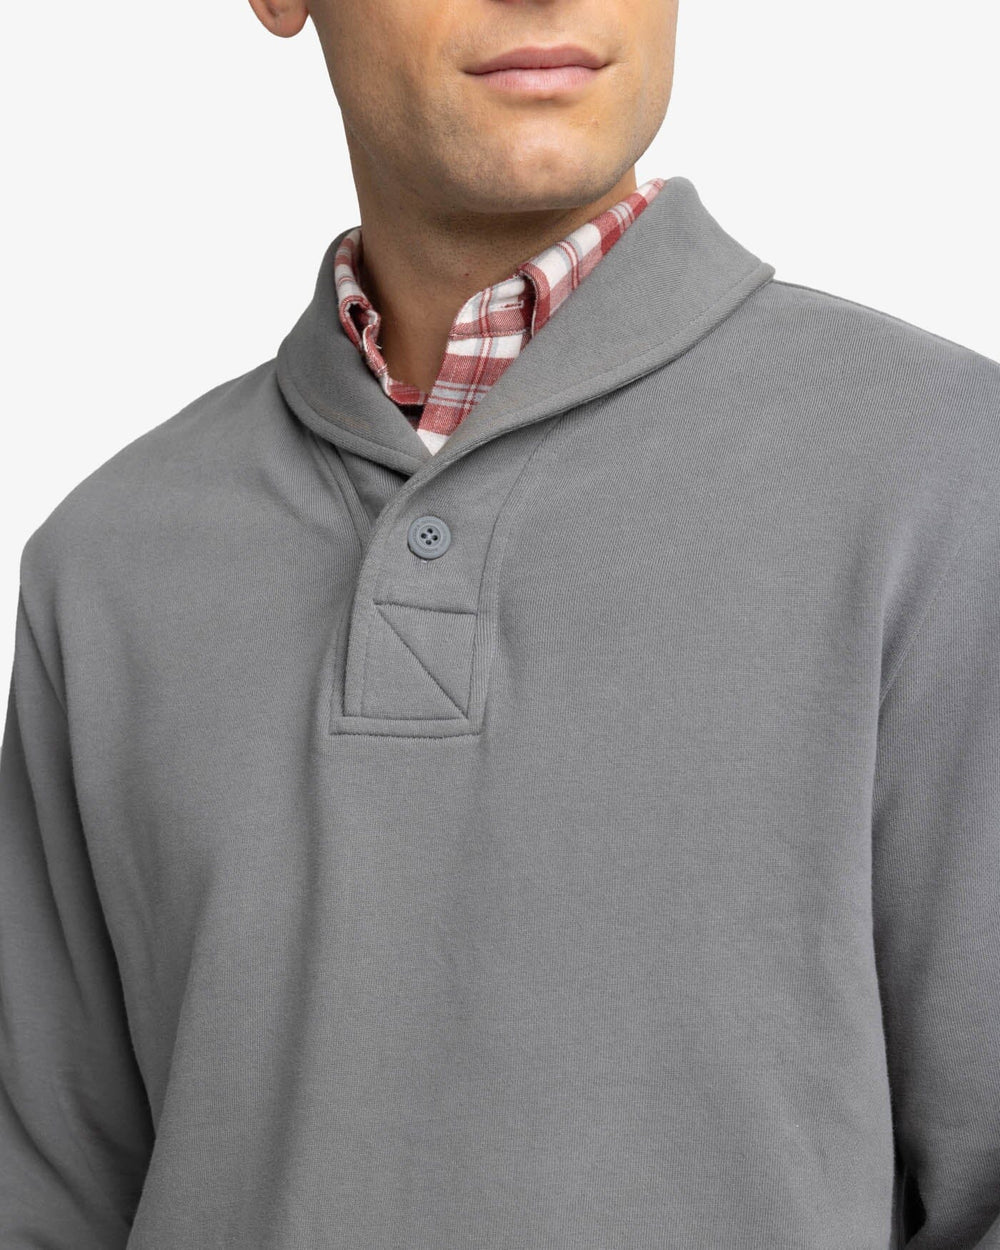 The detail view of the Southern Tide Stanley Pullover by Southern Tide - Shadow Grey